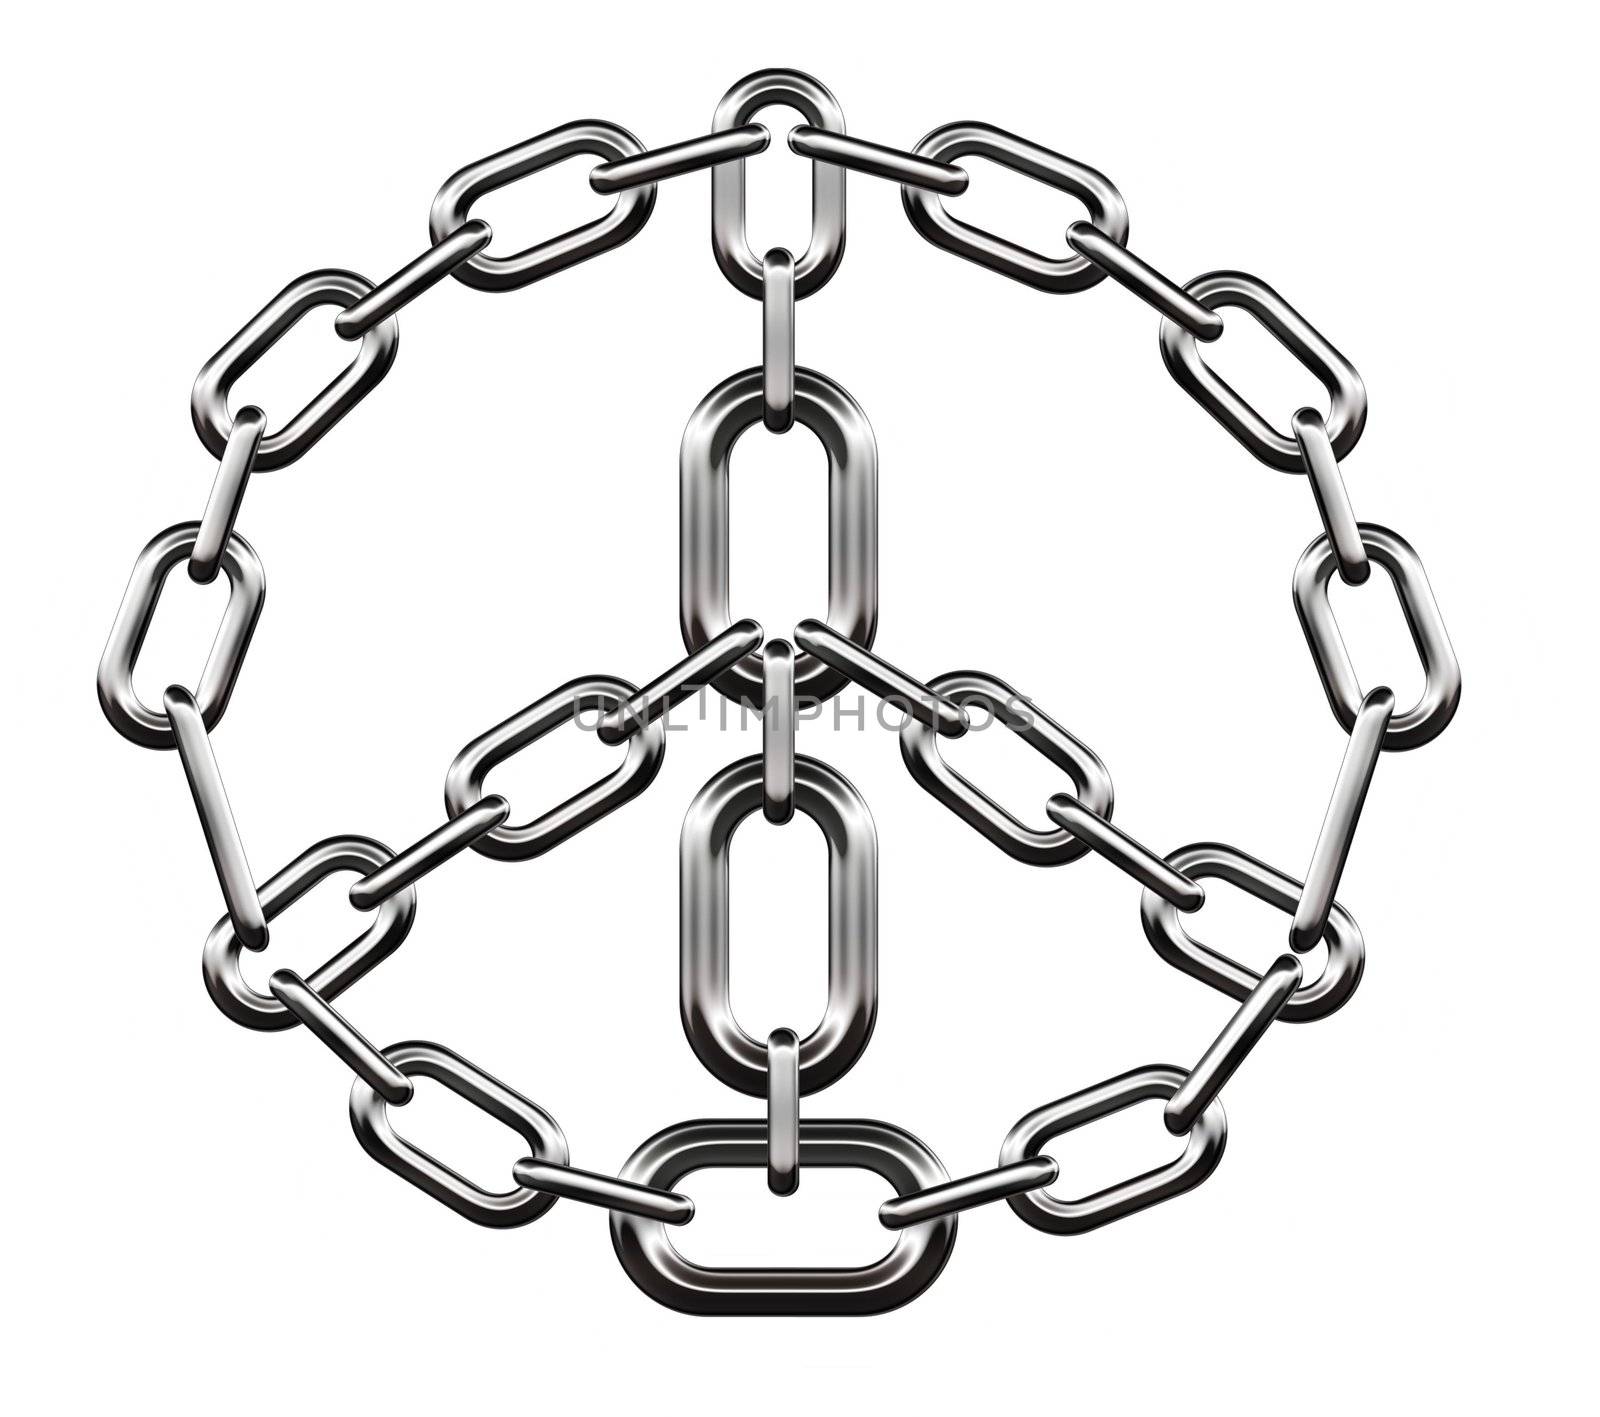 Close-up of large shiny welded metal chain links over white background